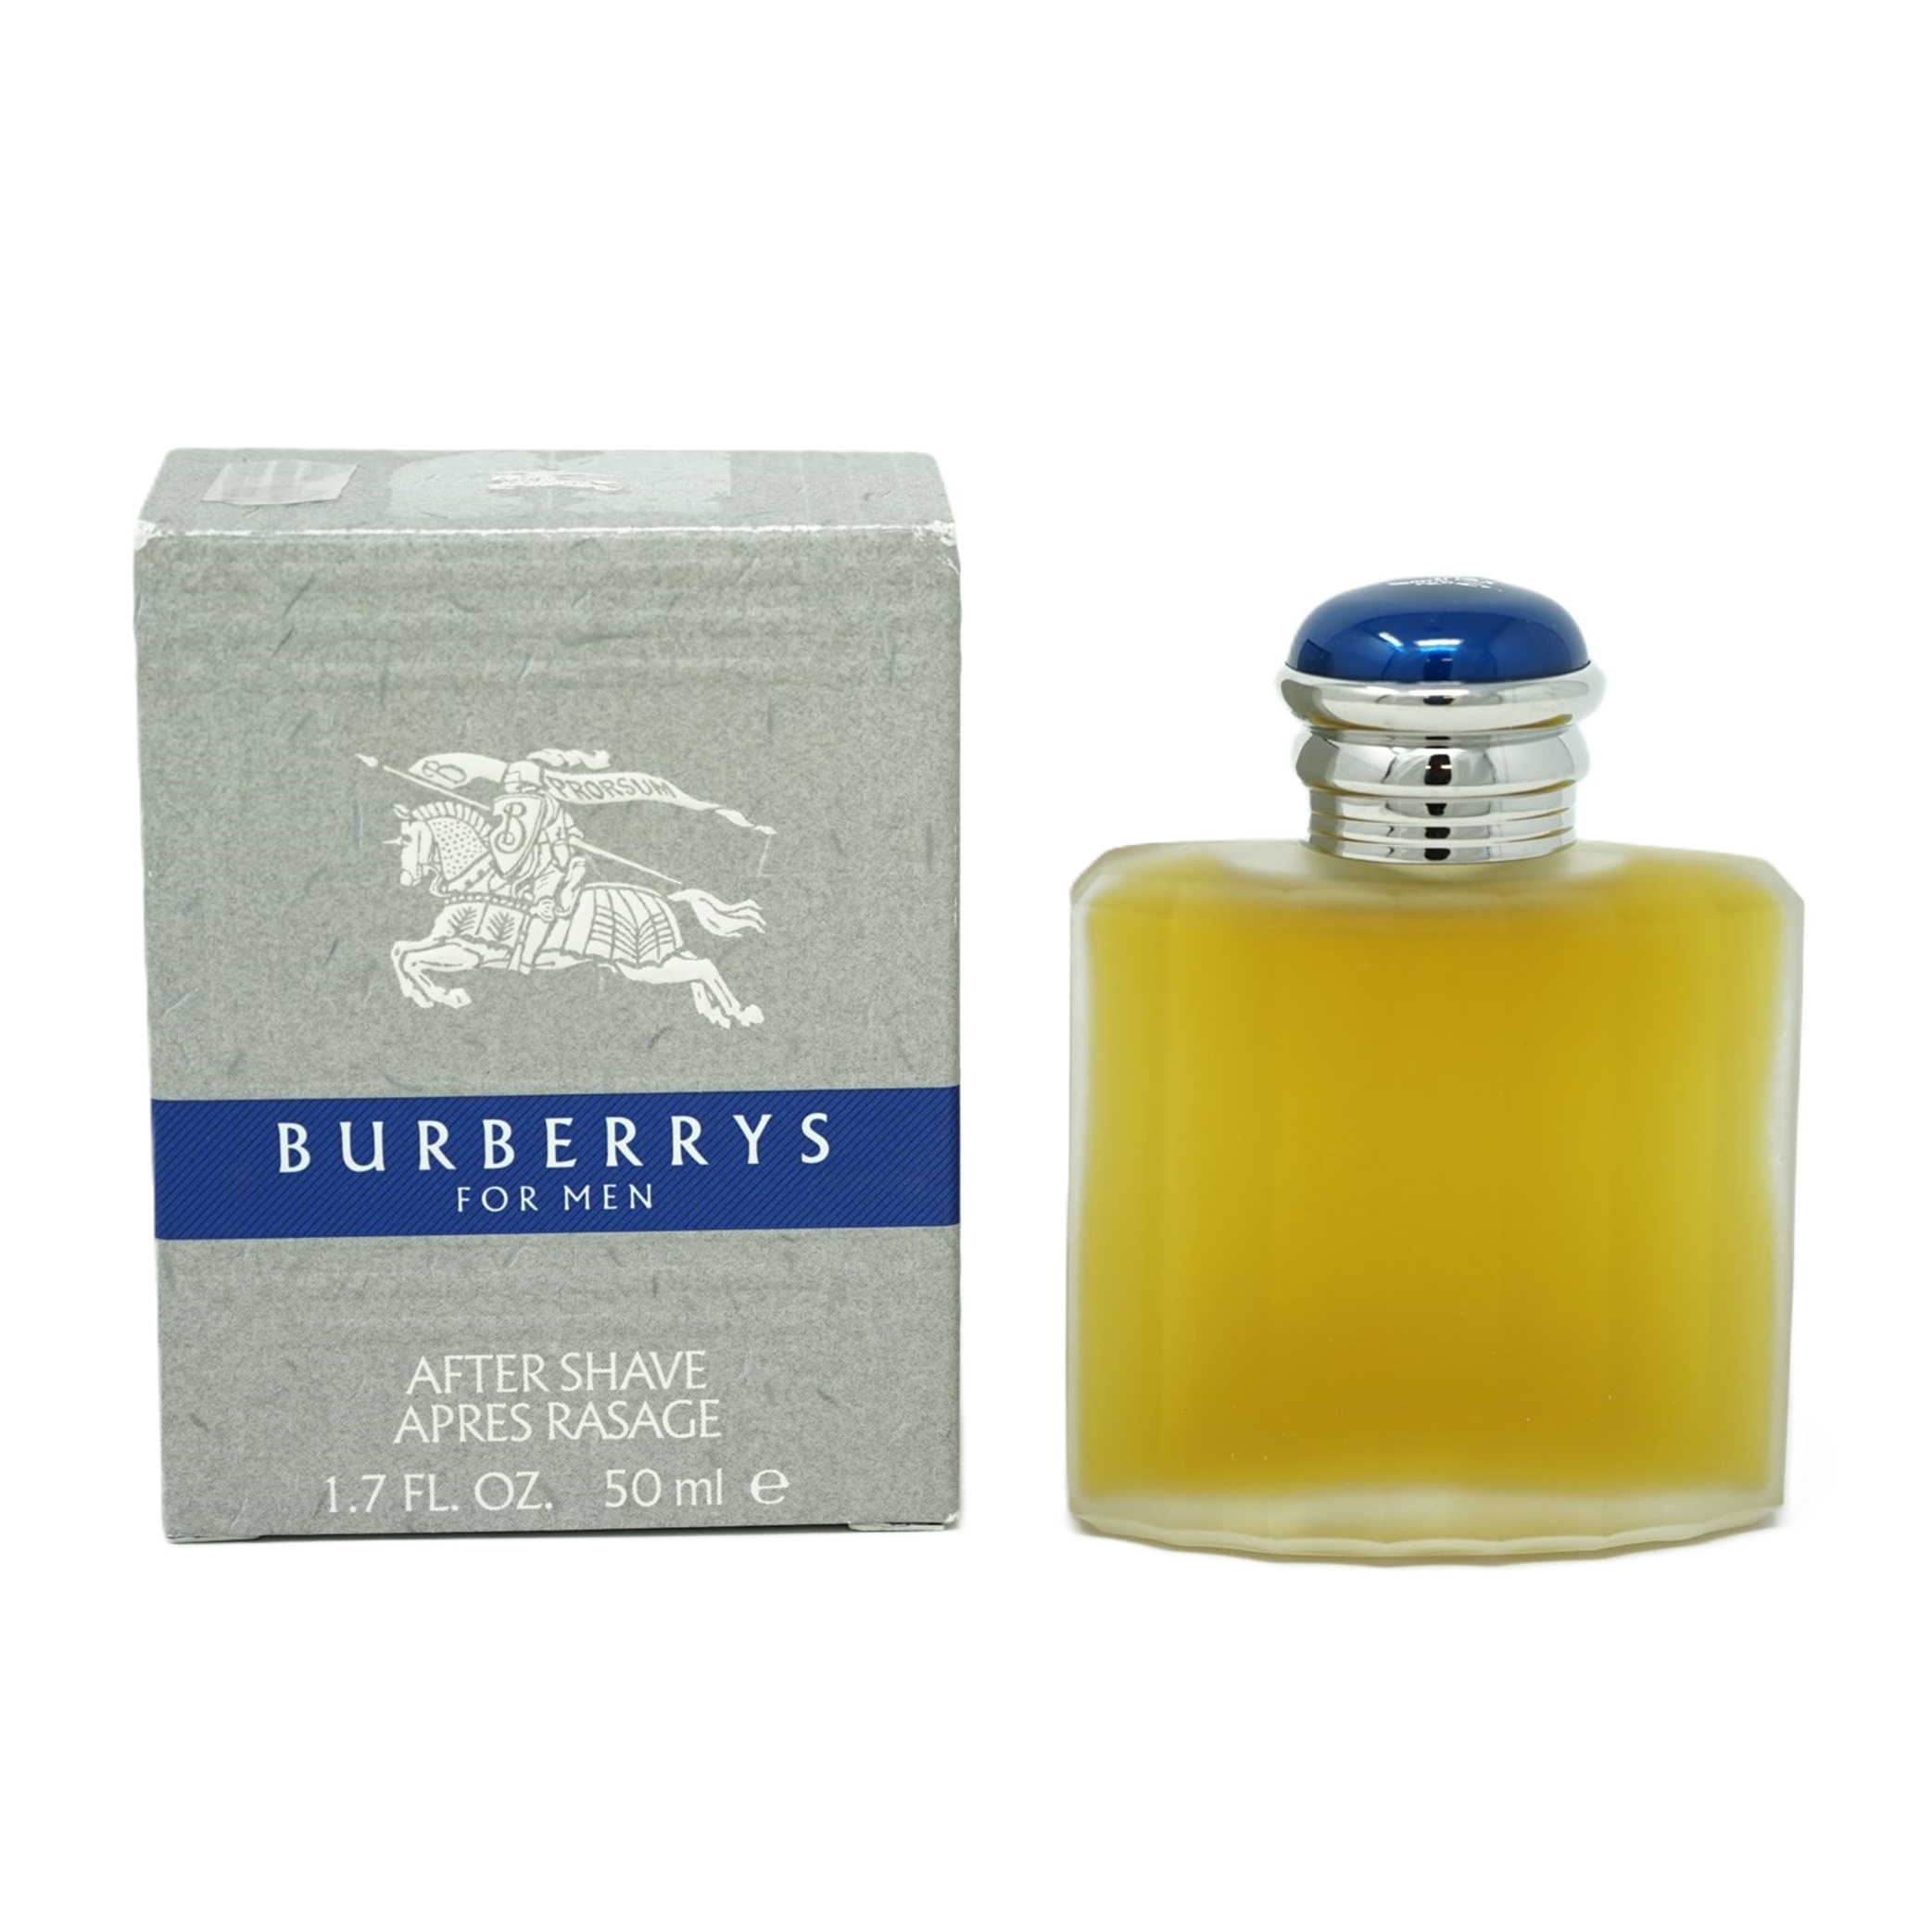 Burberry Burberrys For Men After Shave 50 ml